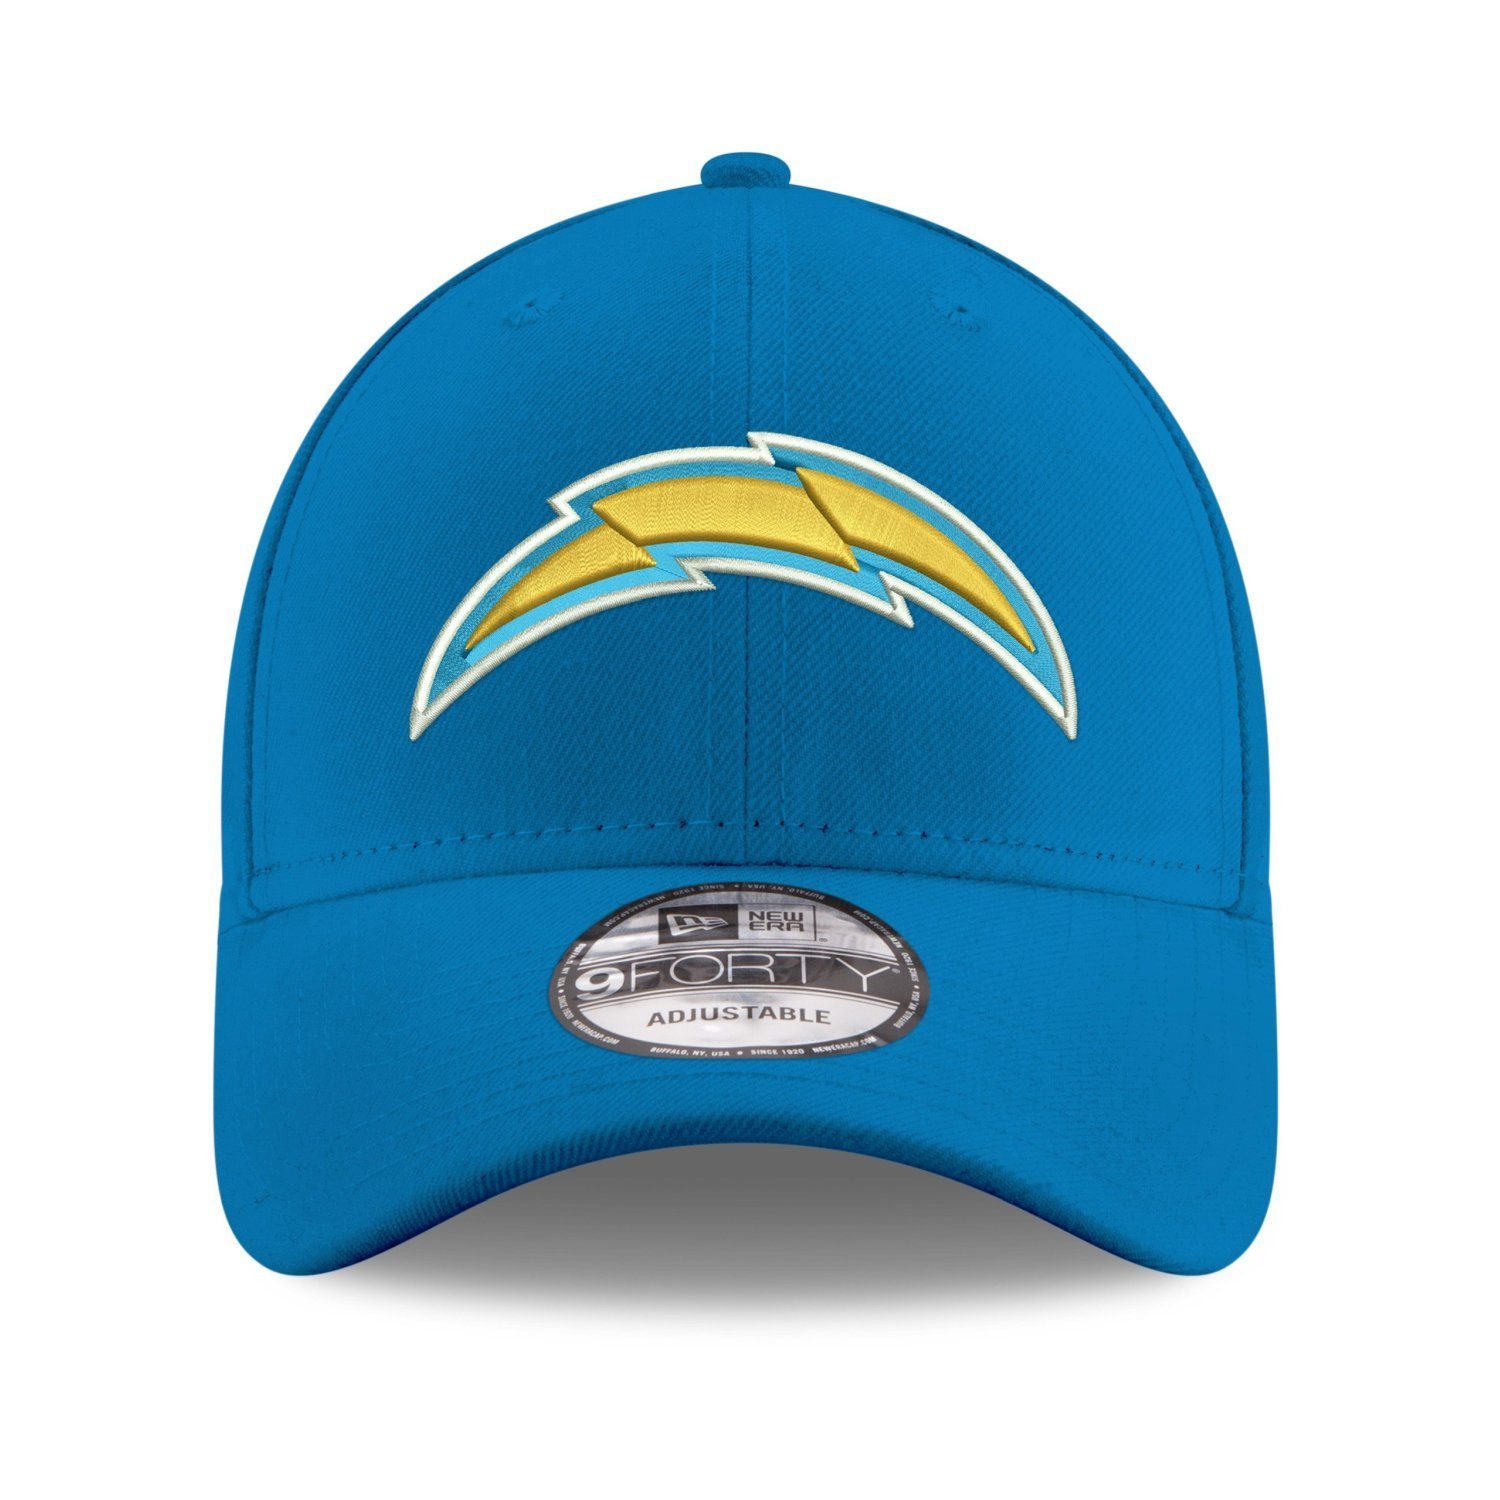 New Era Trucker Los Chargers LEAGUE NFL Cap Angeles 9Forty